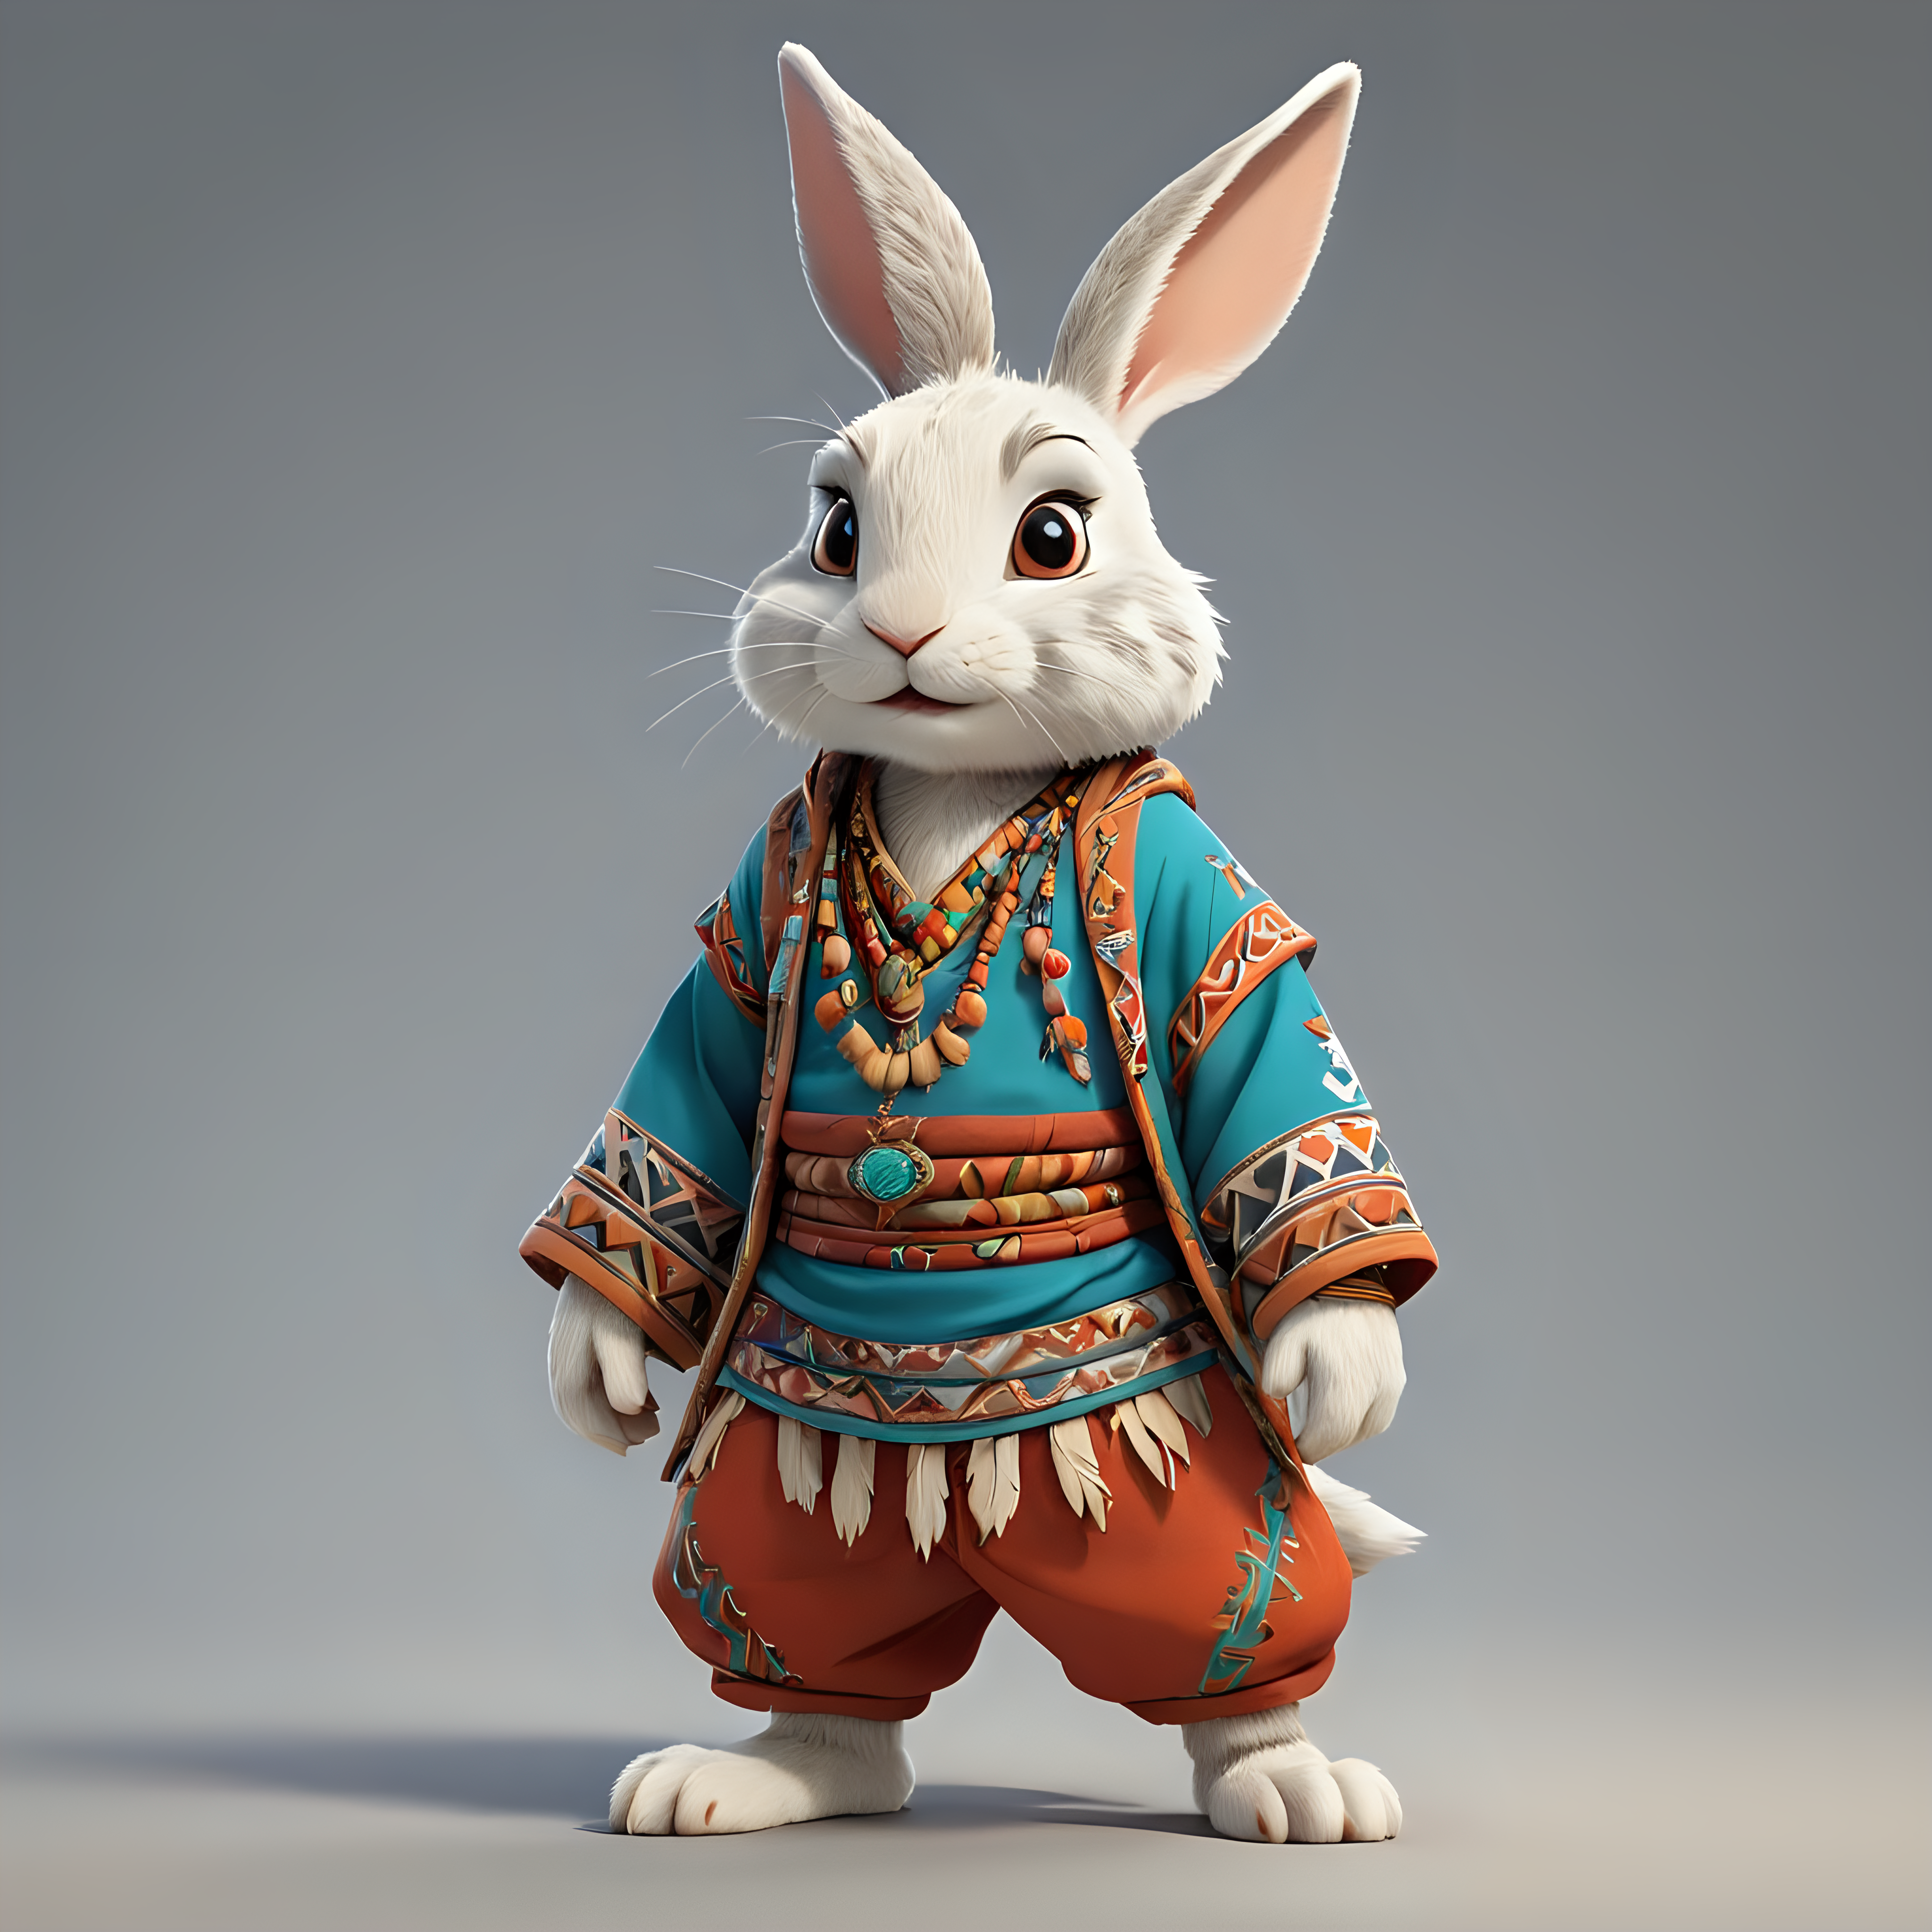 Cartoon Rabbit Wearing Tribal Clothes Whimsical Character Illustration